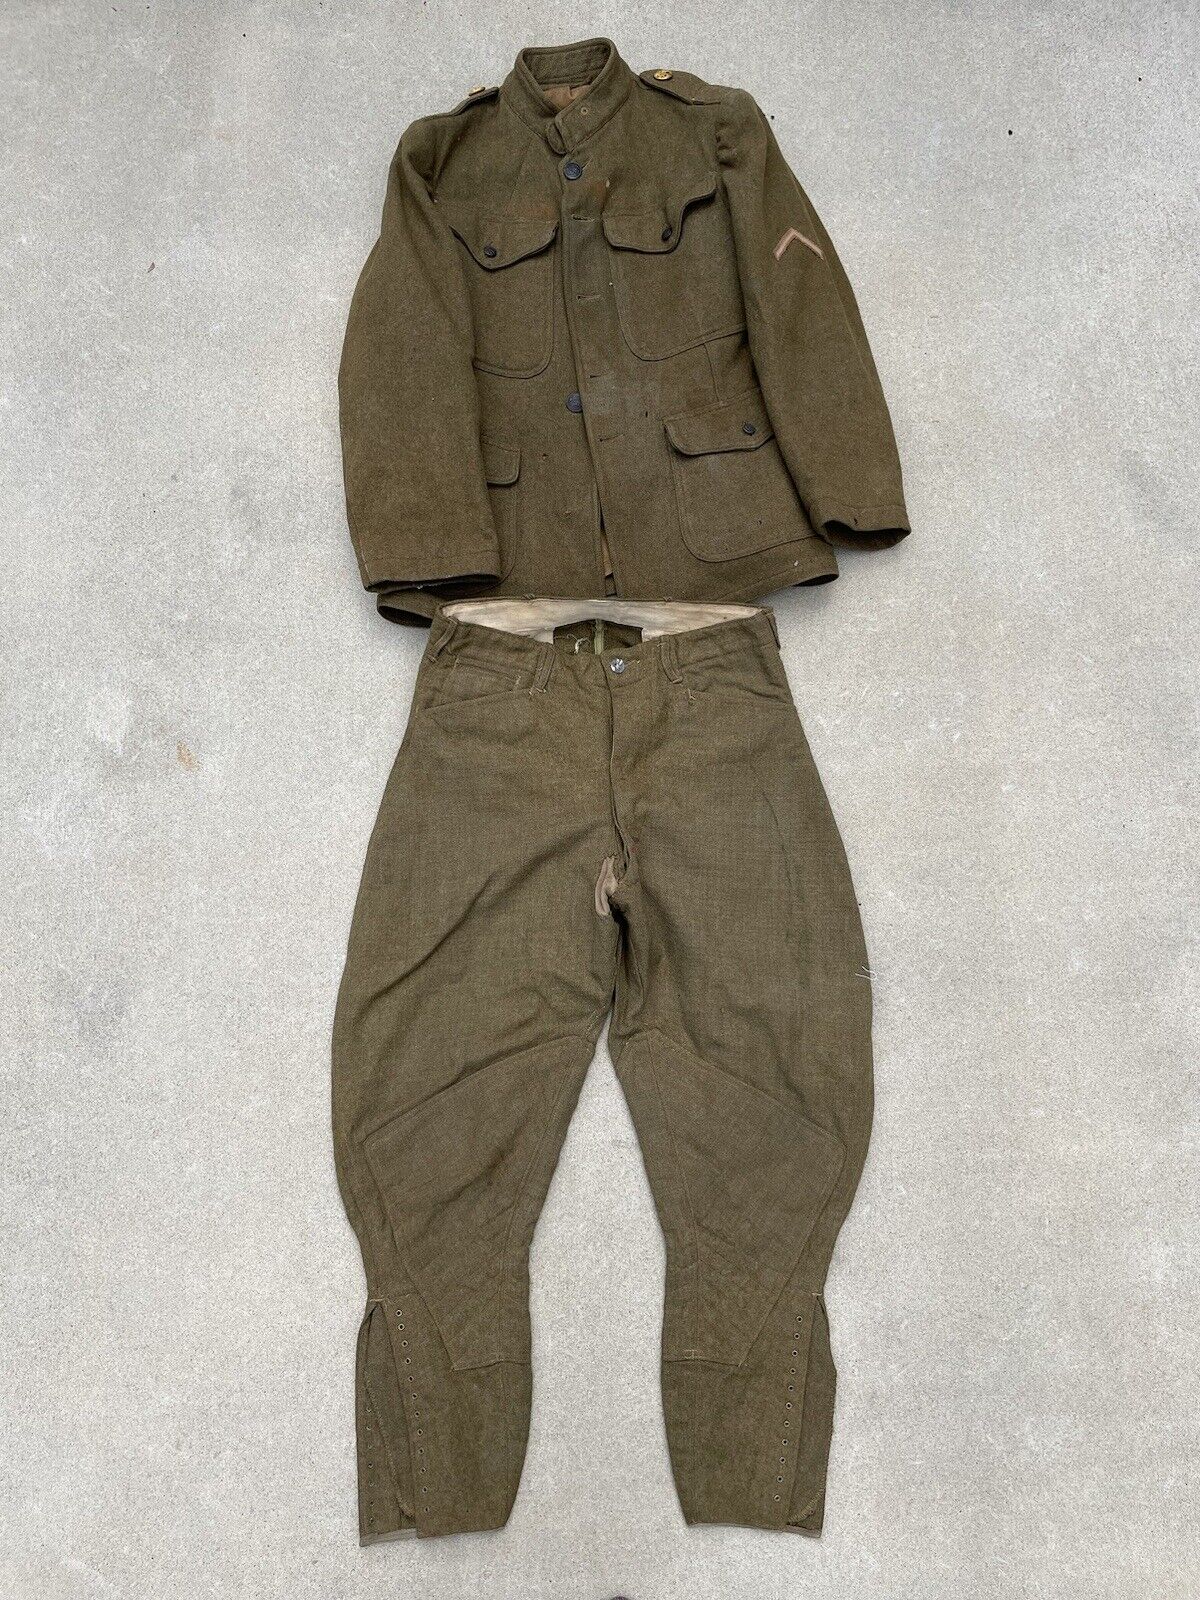 Vintage World War 1 Doughboy Jacket & Pants Outfit Soldier WW1 US Army